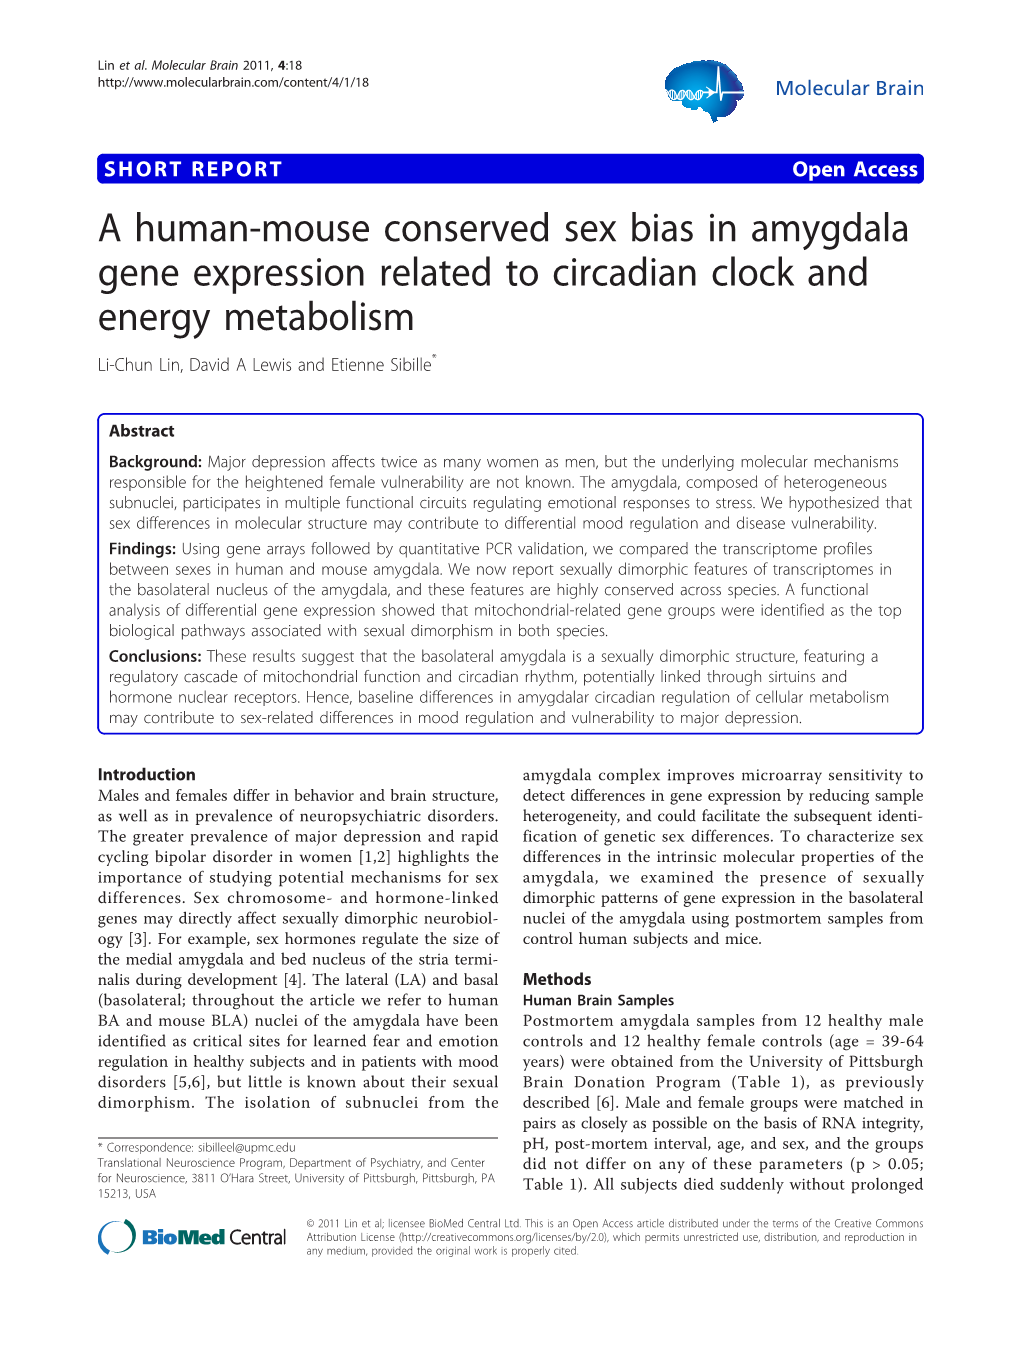 A Human-Mouse Conserved Sex Bias in Amygdala Gene Expression Related to Circadian Clock and Energy Metabolism Li-Chun Lin, David a Lewis and Etienne Sibille*